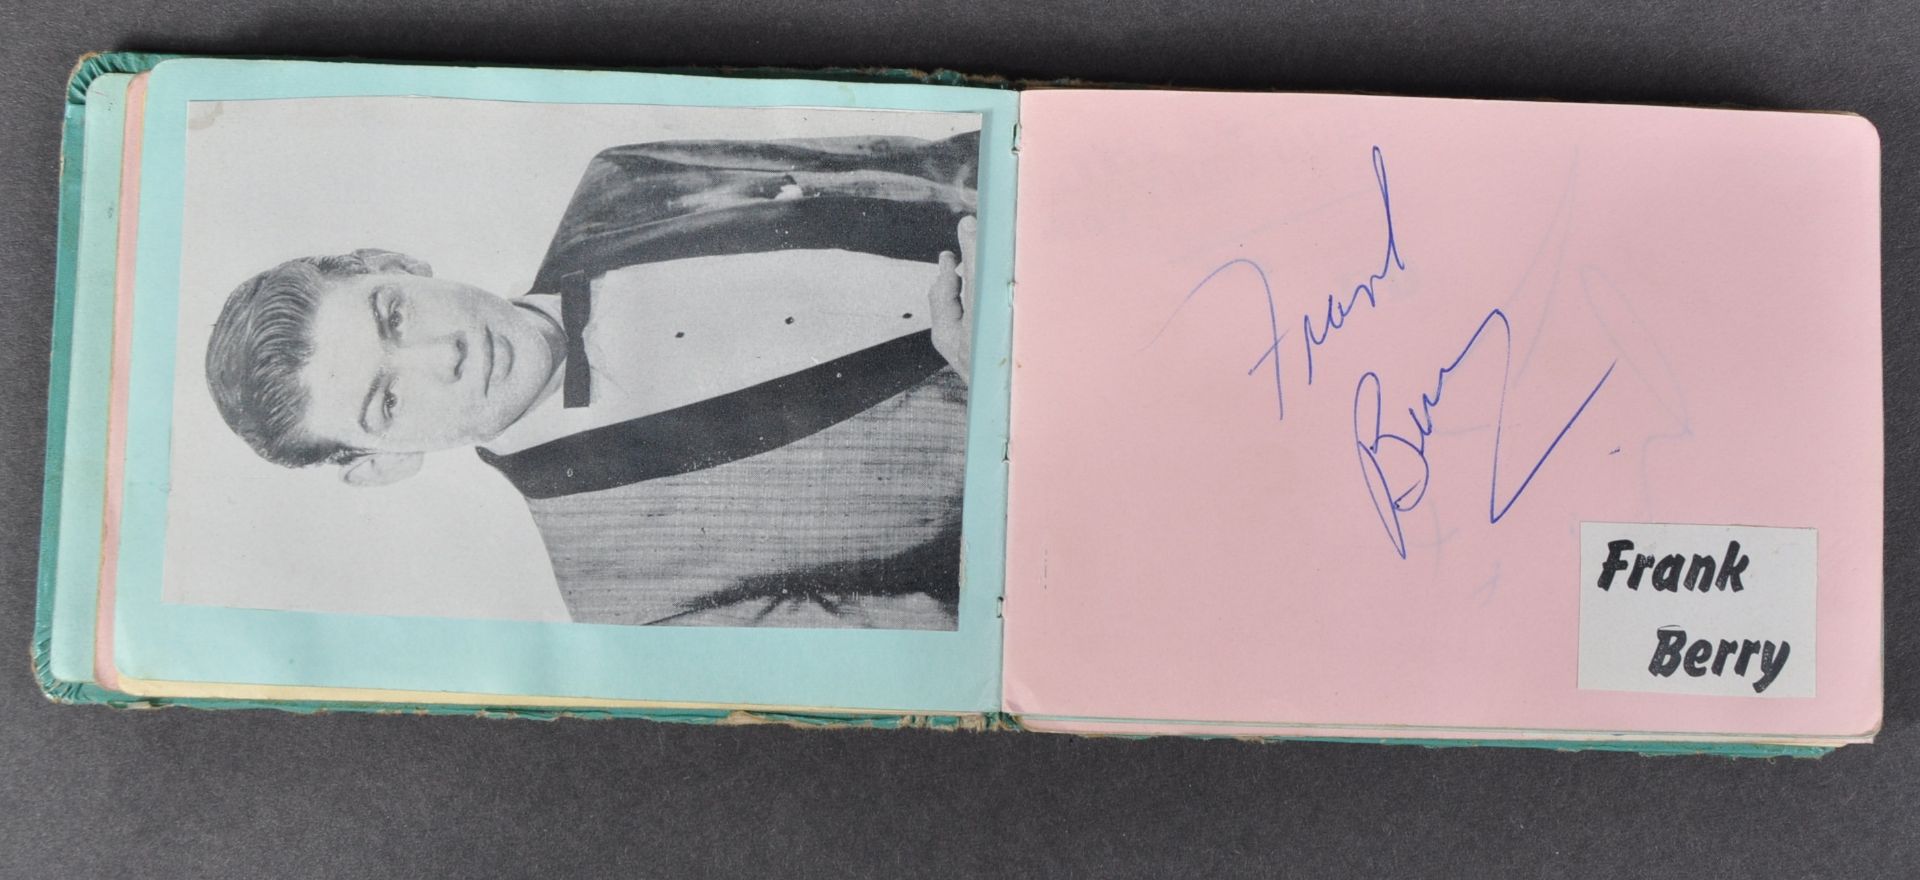 1960S MUSIC AUTOGRAPH ALBUMS - OBTAINED FROM DISCS-A-GOGO - Image 12 of 31